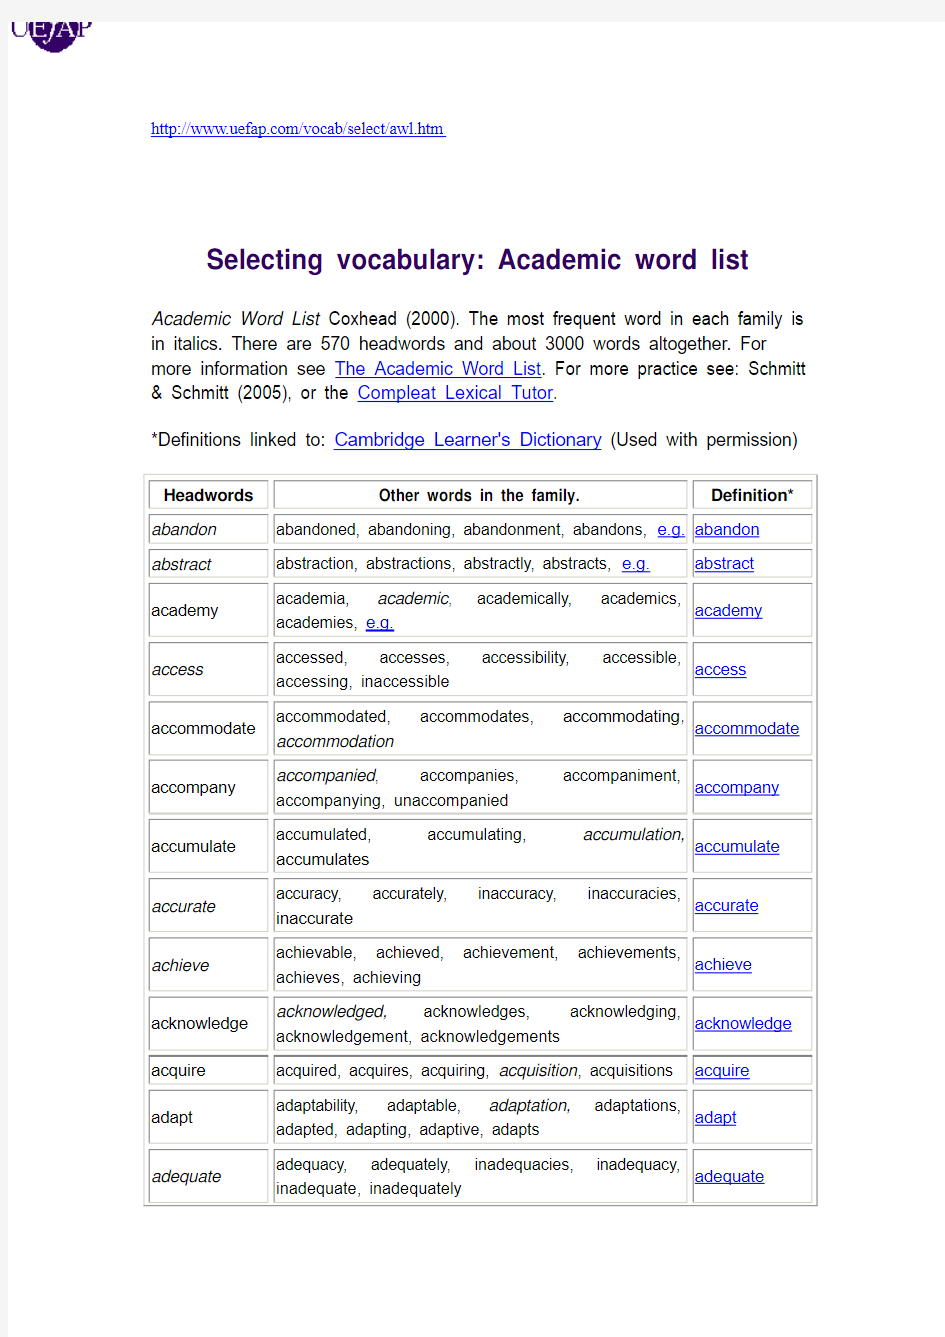 Acdemic word list